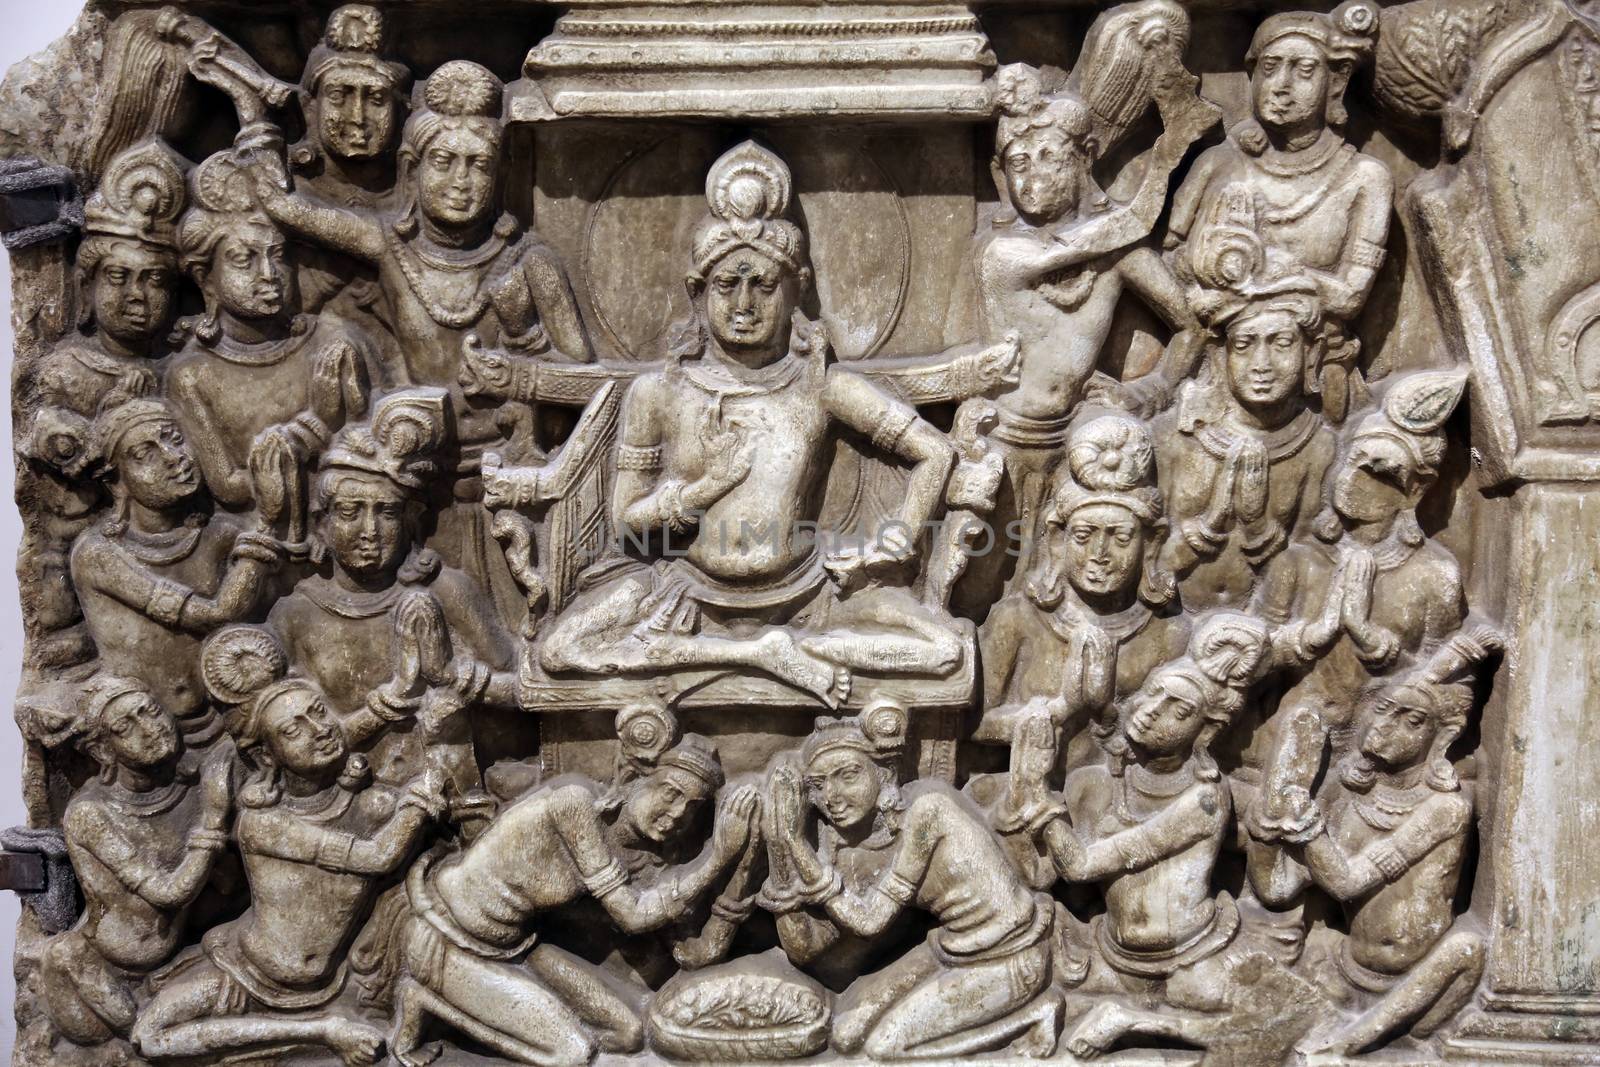 Life scenes of Buddha, from 2th century found in Amaravati, Andhra Pradesh now exposed in the Indian Museum in Kolkata, on February 15, 2012